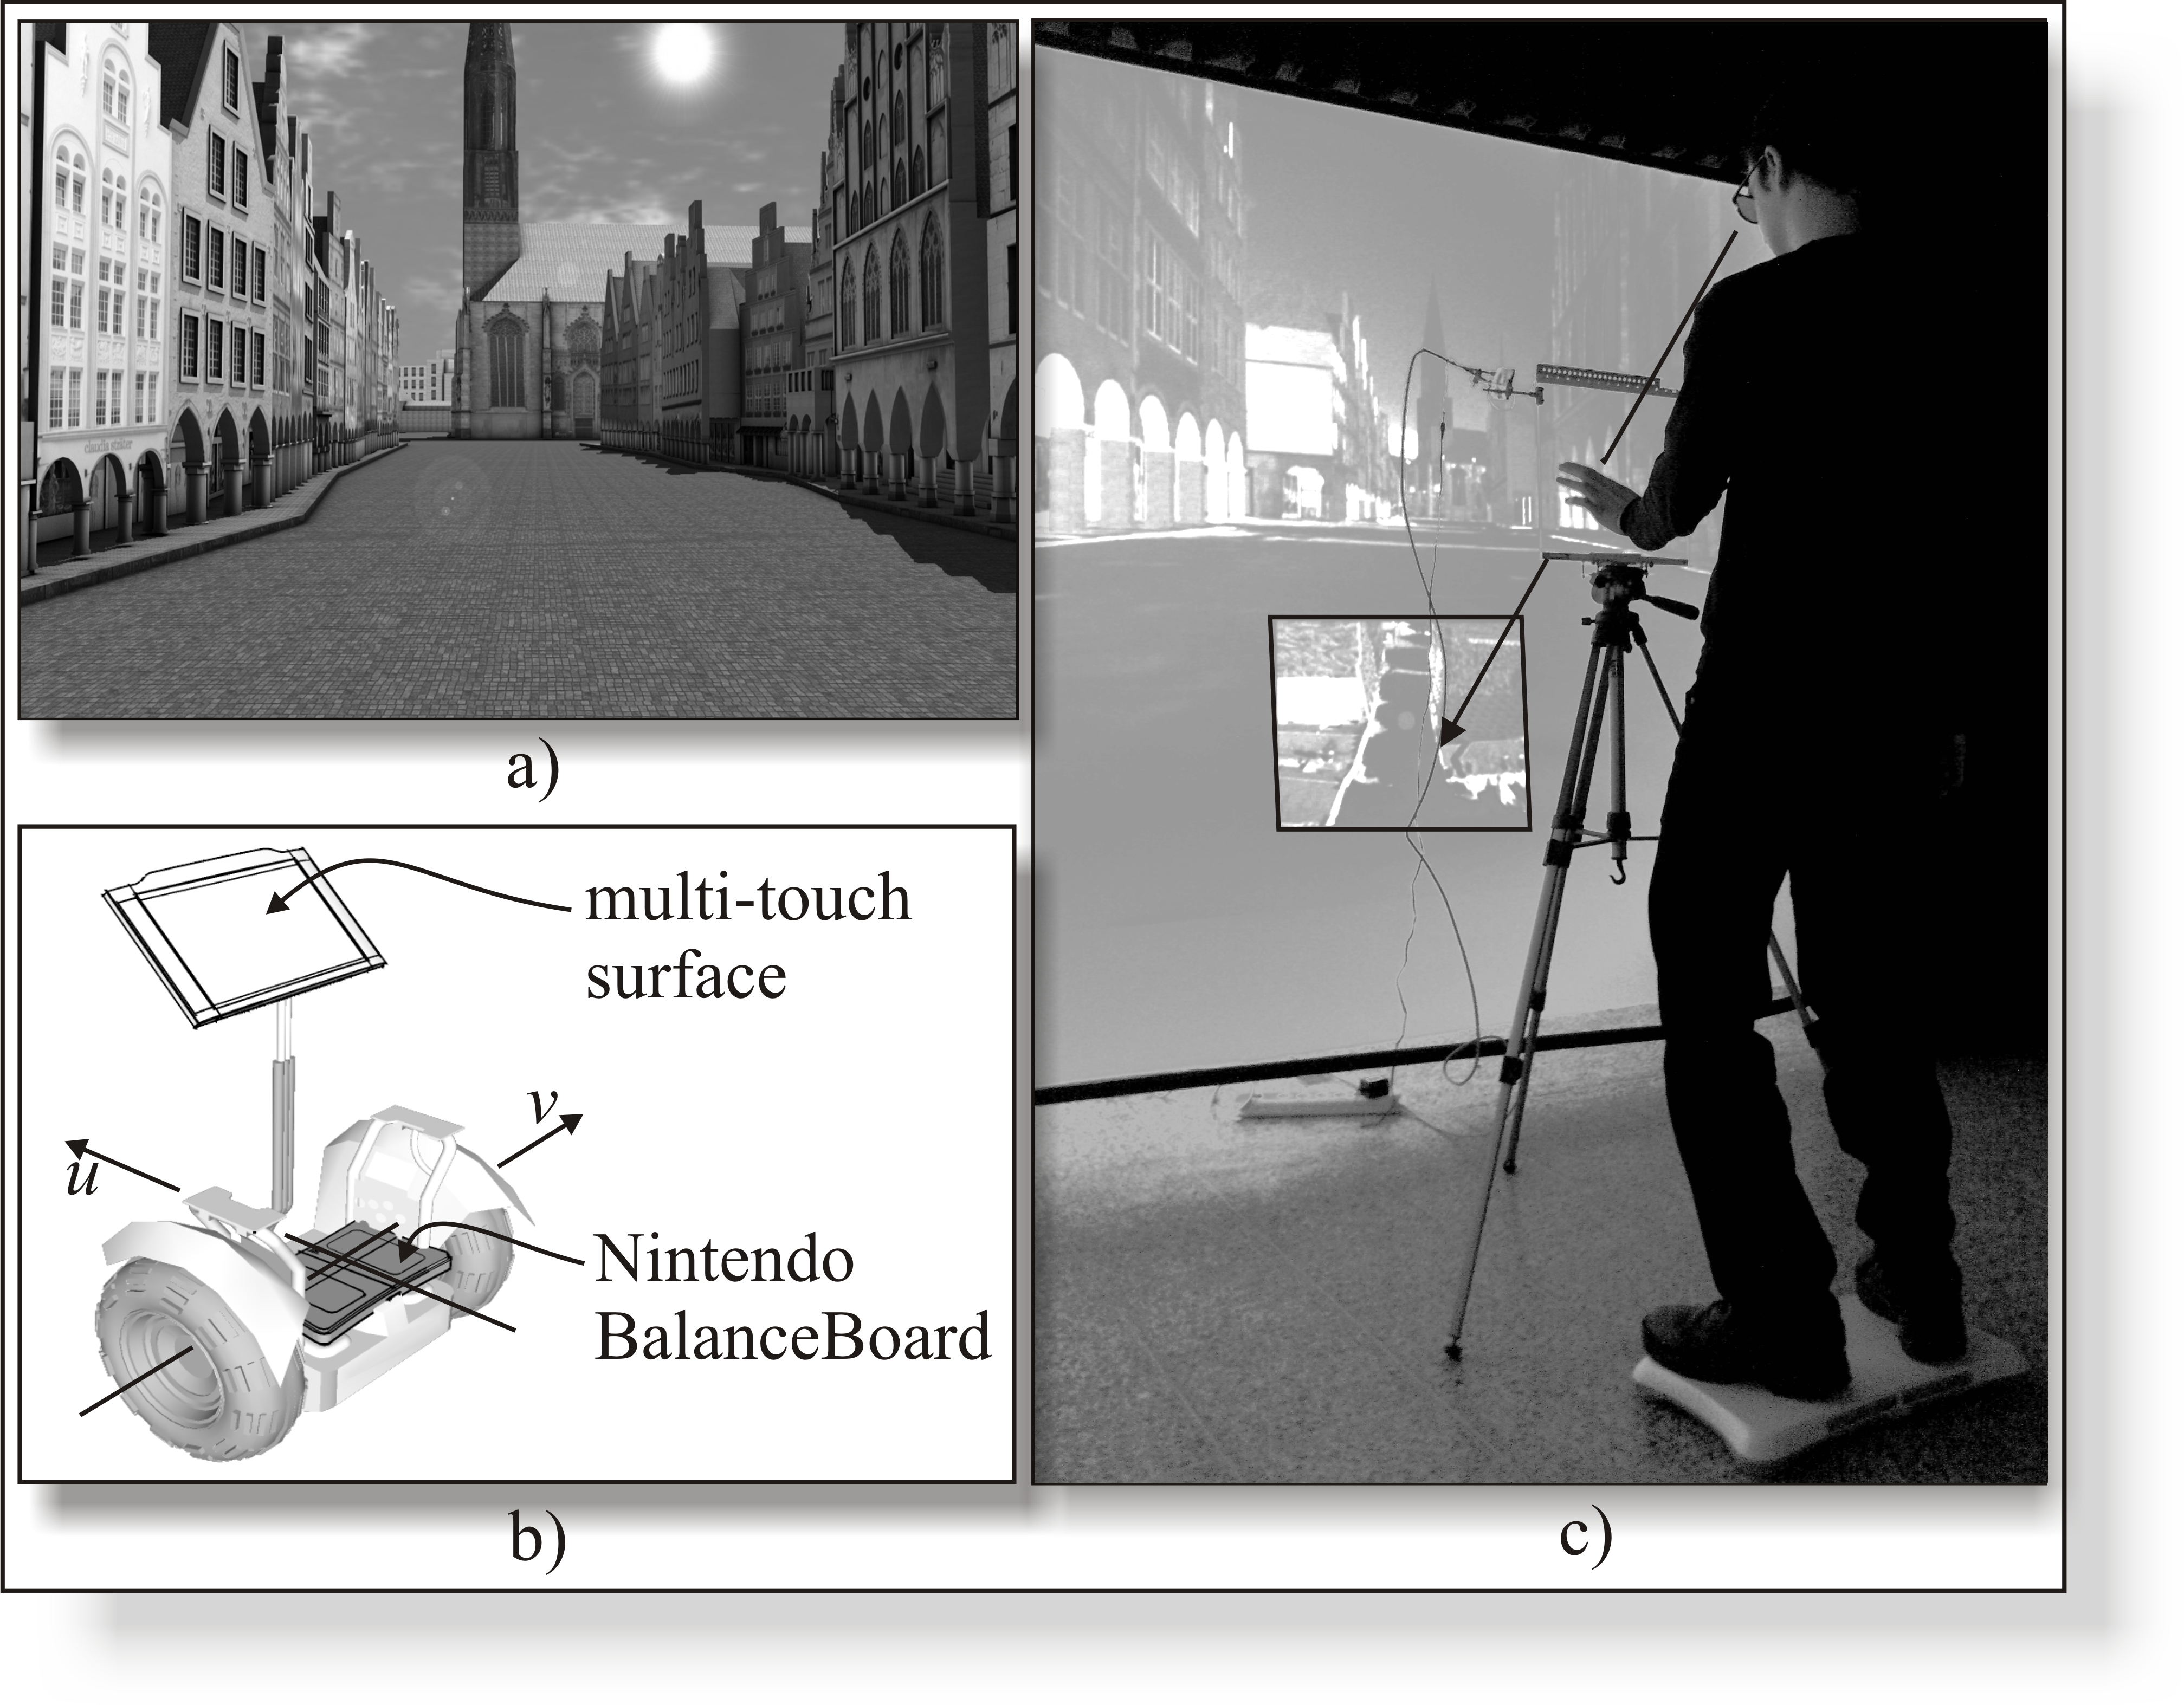 Navigation through Geospatial Environments with a Multi-Touch enabled Human-Transporter Metaphor